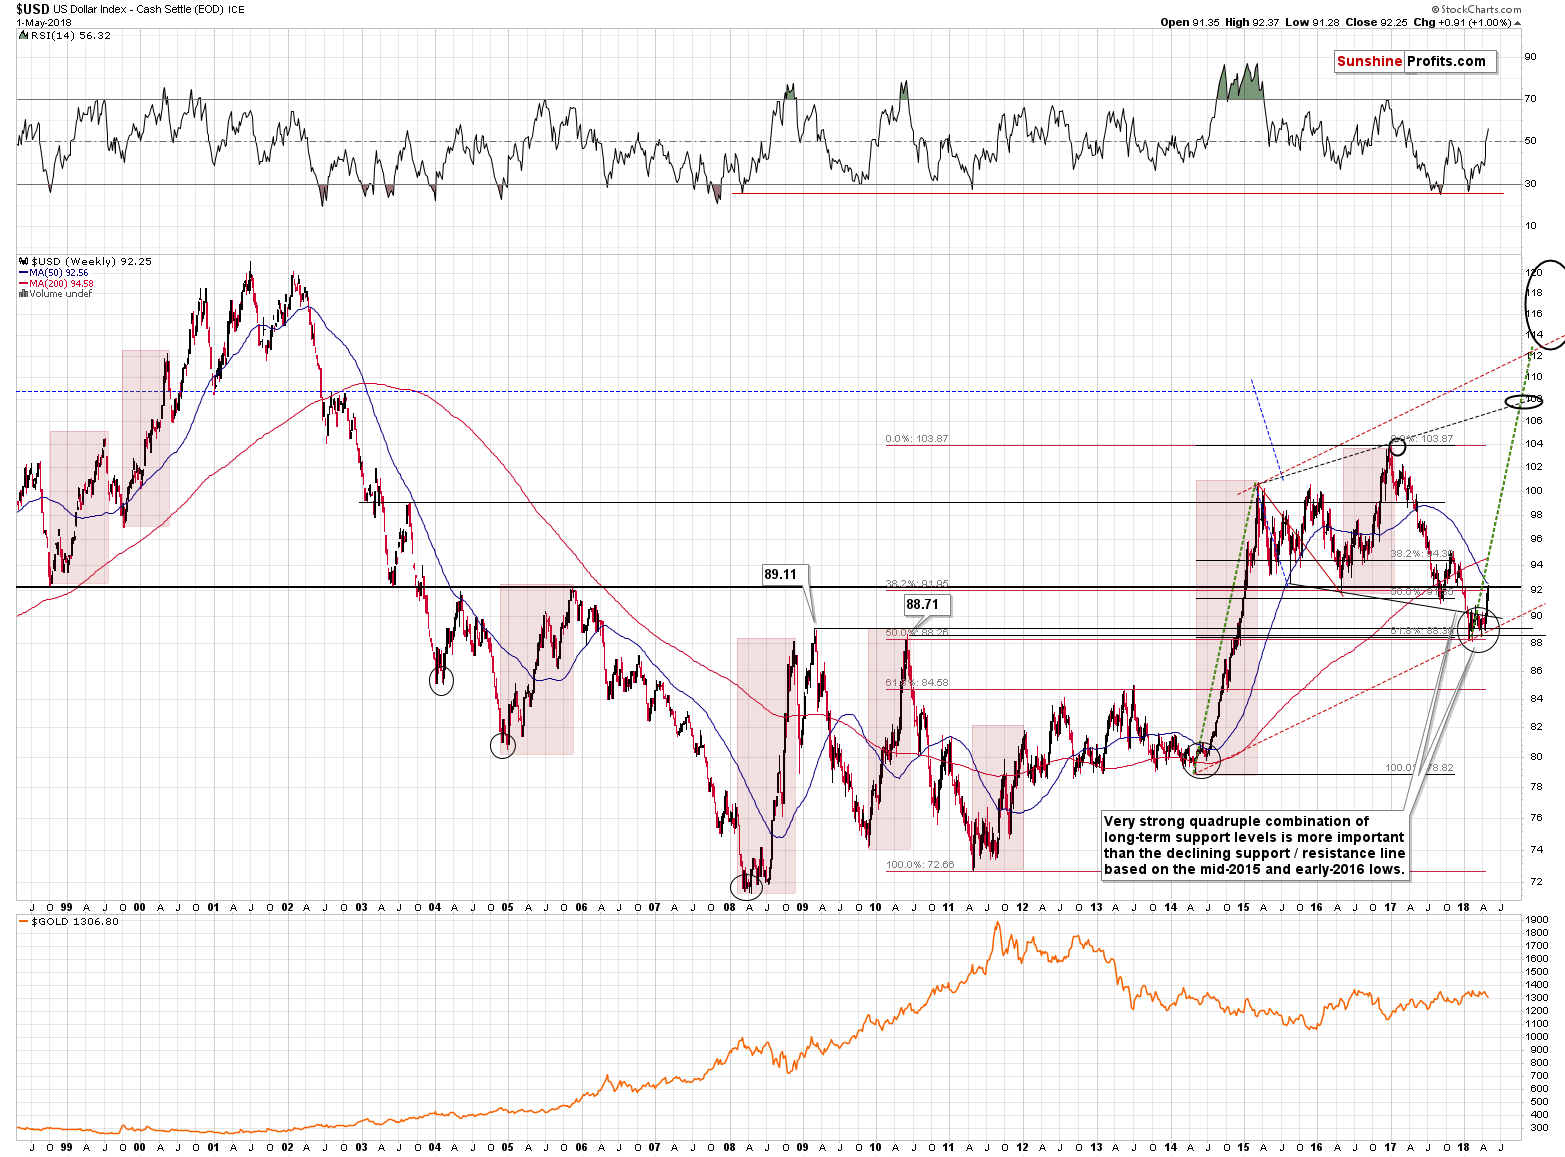 Gold and US Dollar - Long-term price chart - USD